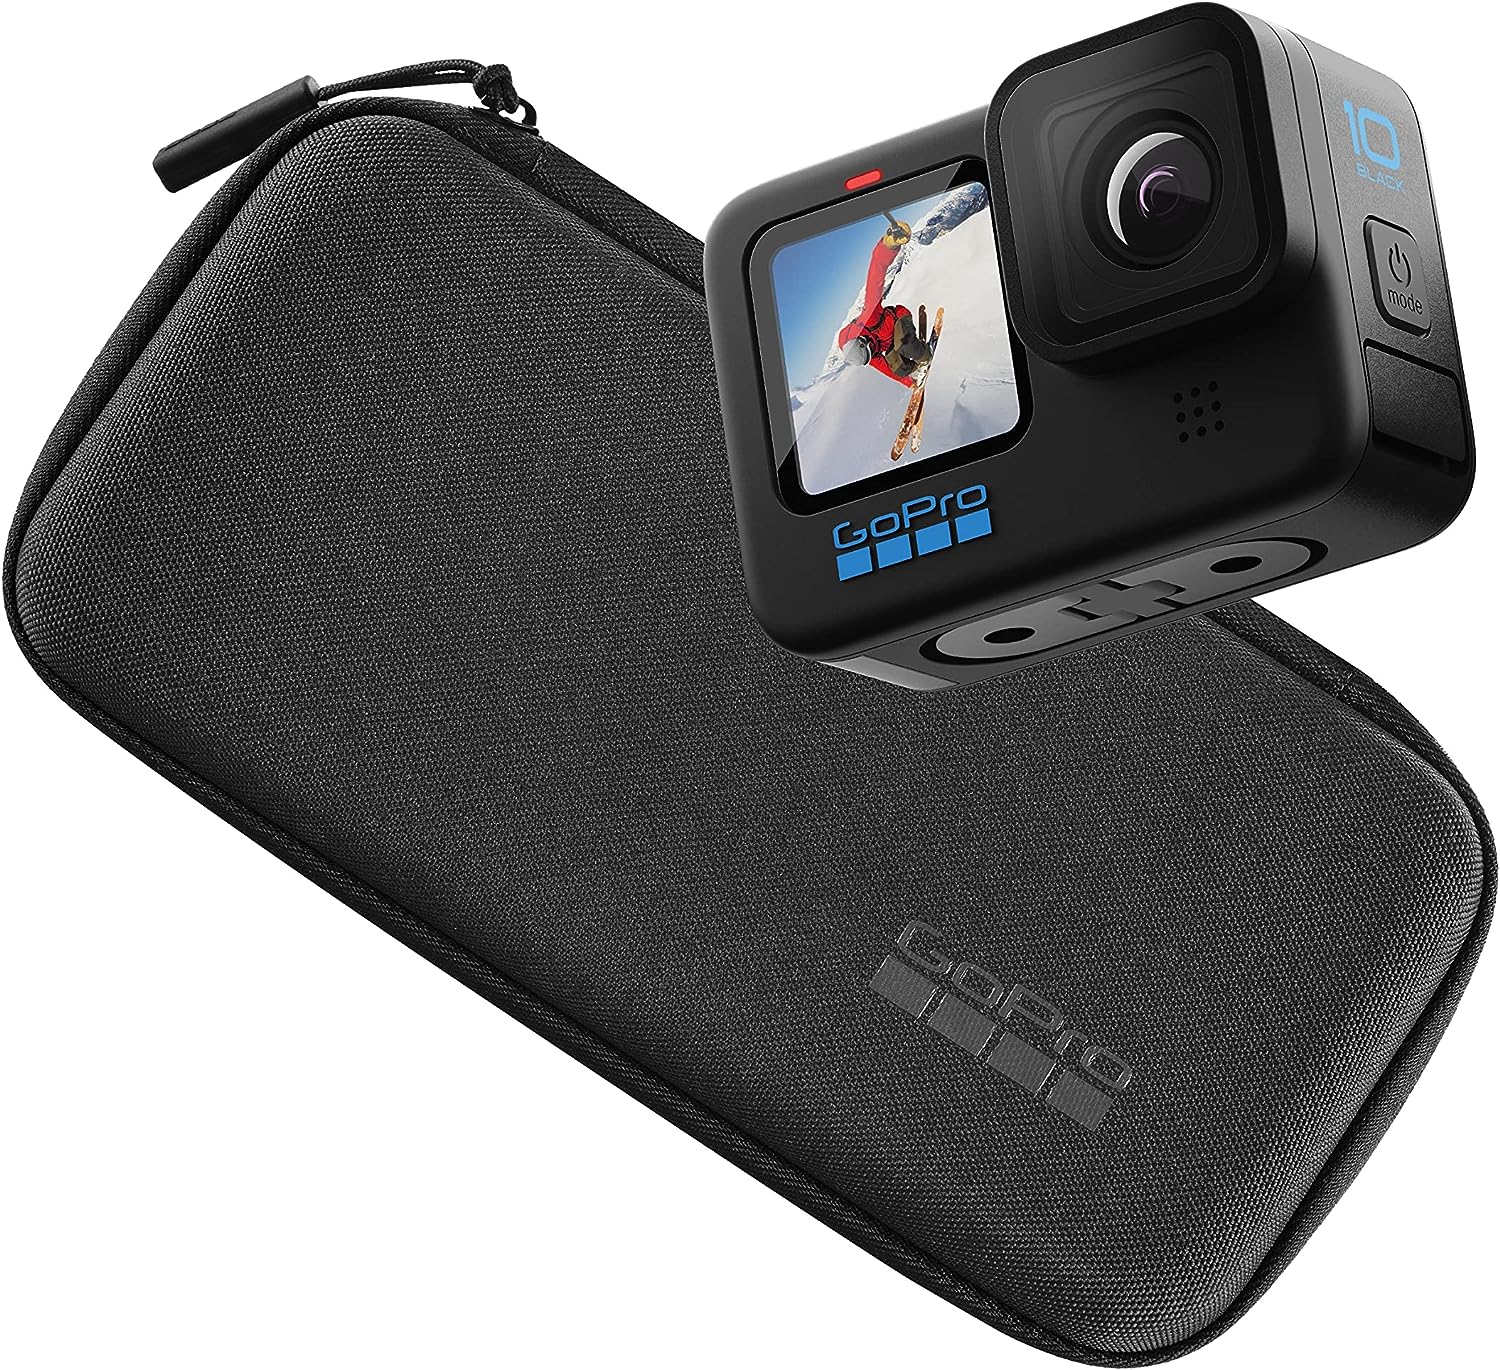 GoPro Hero 10 black is a great GoPro for travel